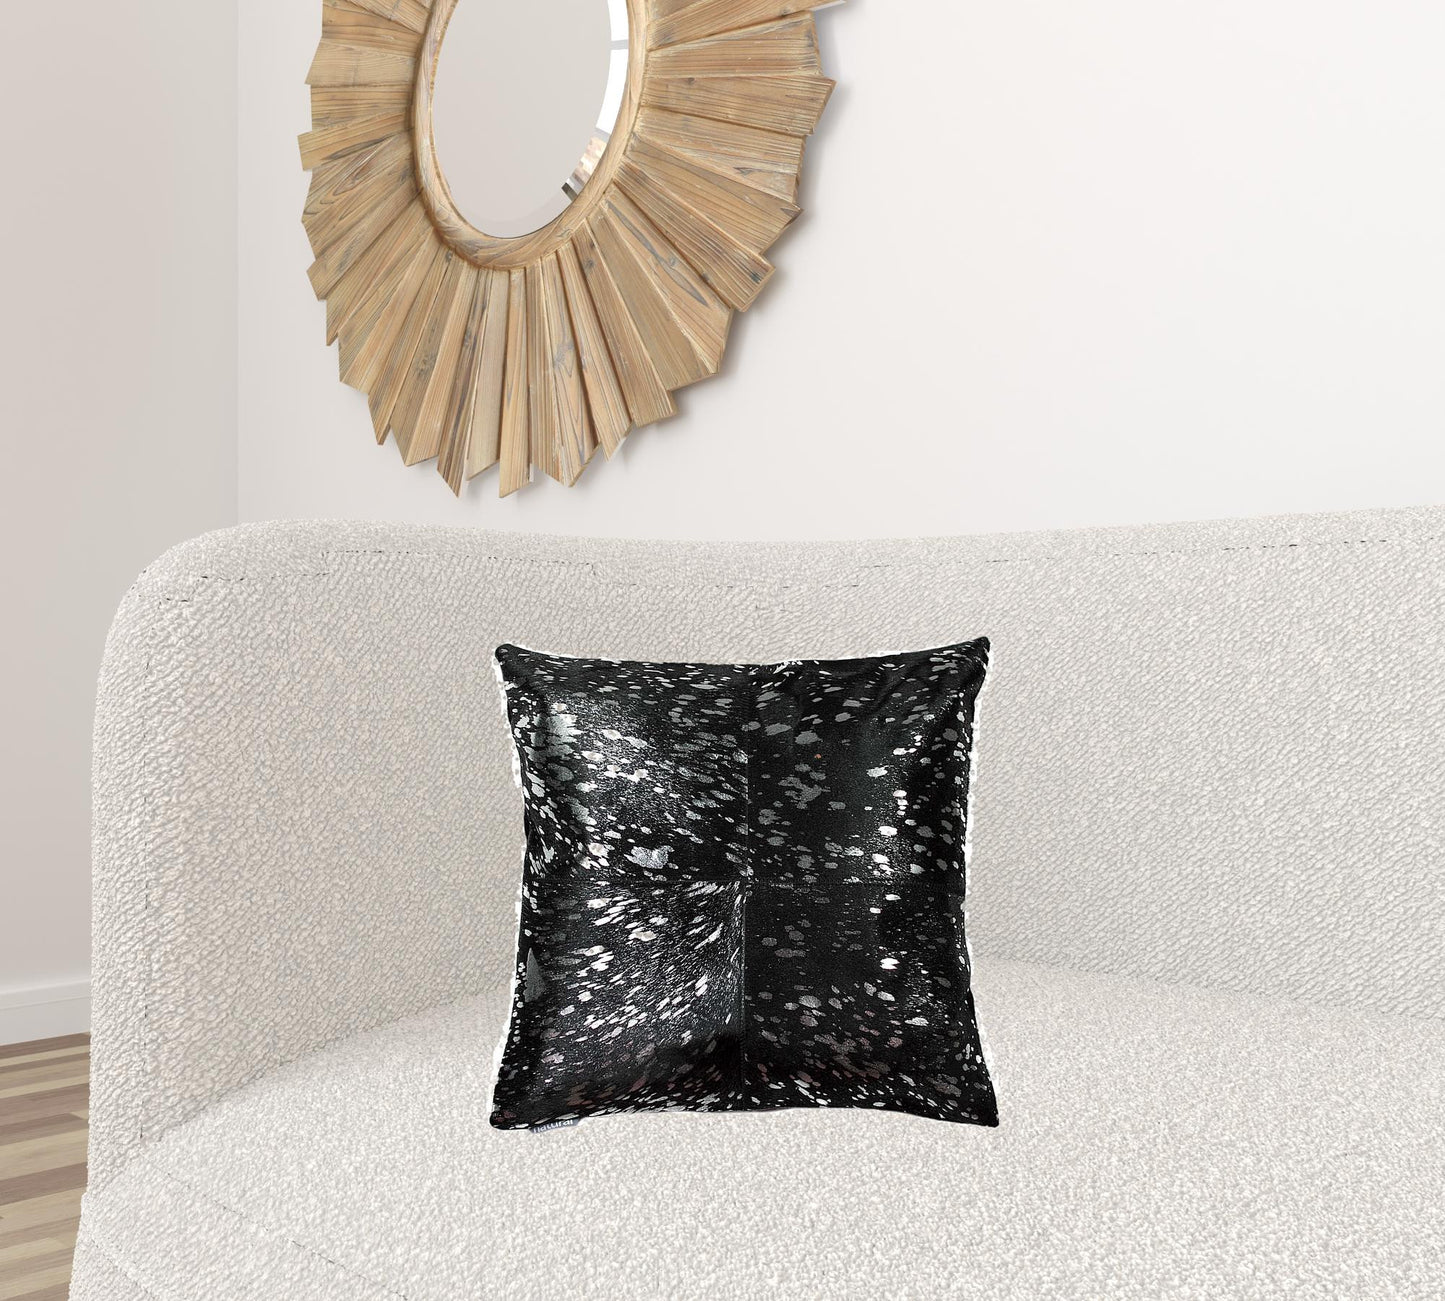 18 X 18 Black And Silver Cowhide Throw Pillow